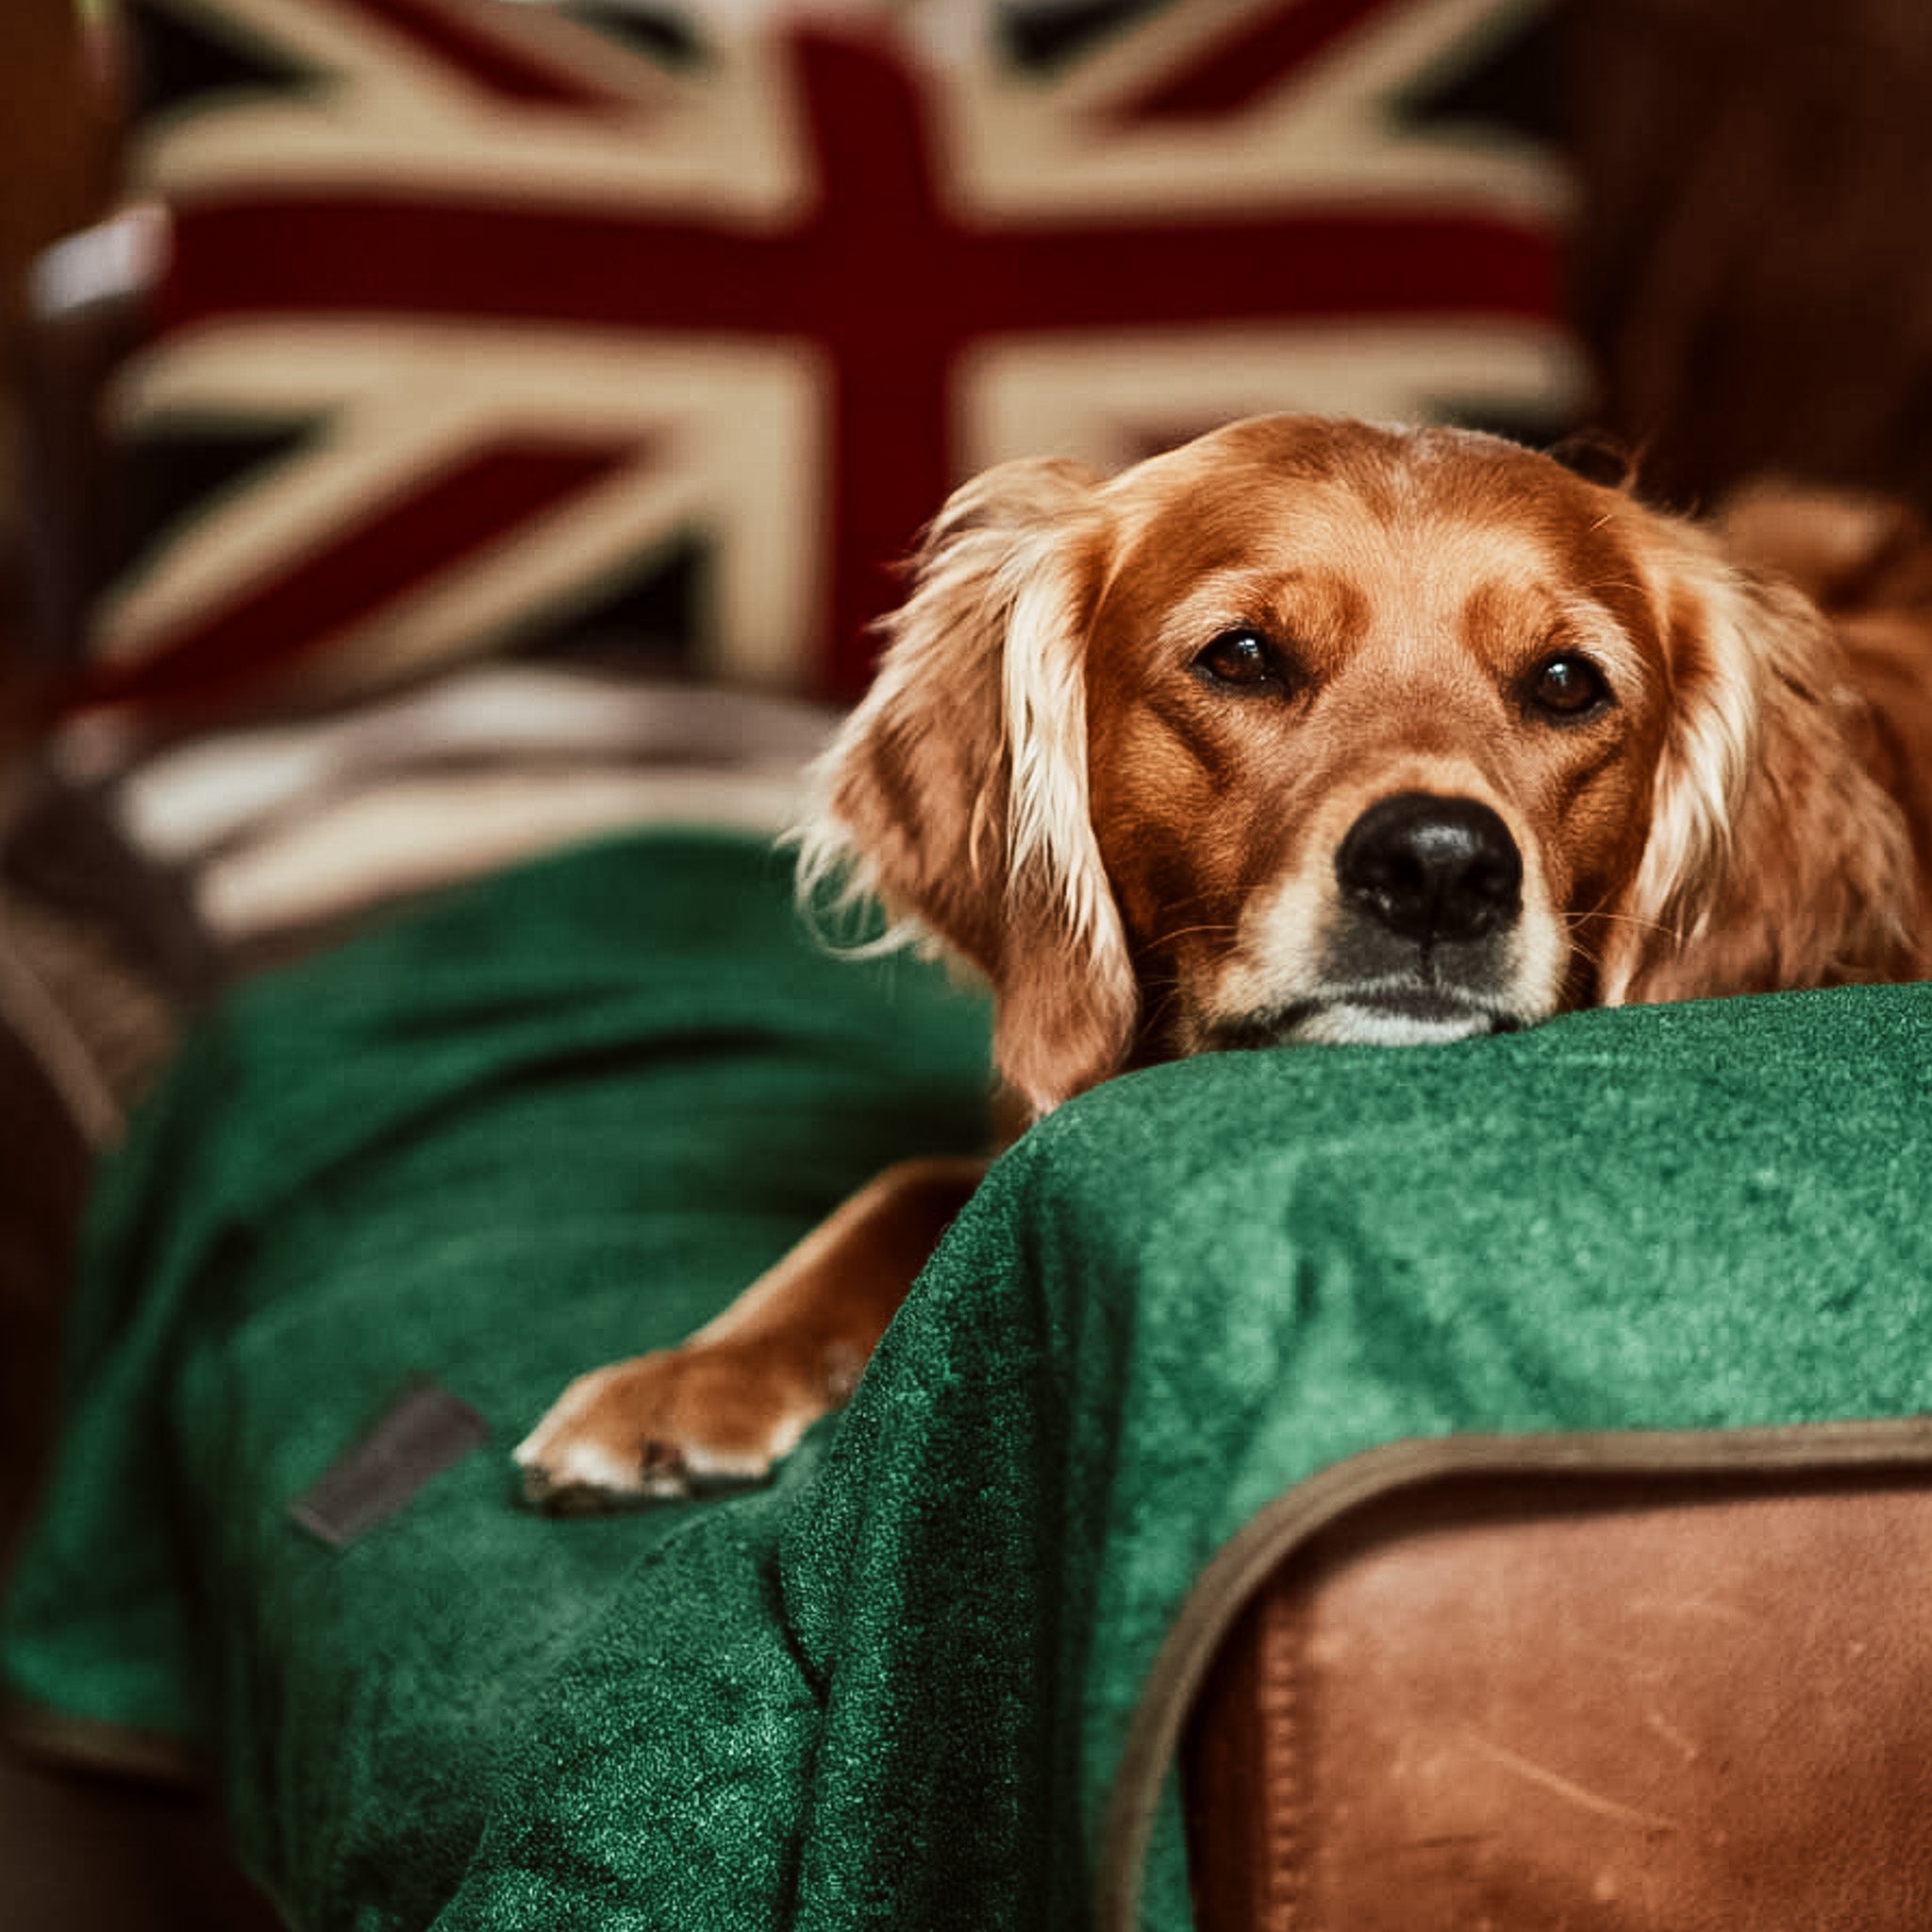 Dog relaxing on a leather sofa at home, with added comfort from a NASH bamboo dog throw in forest green.